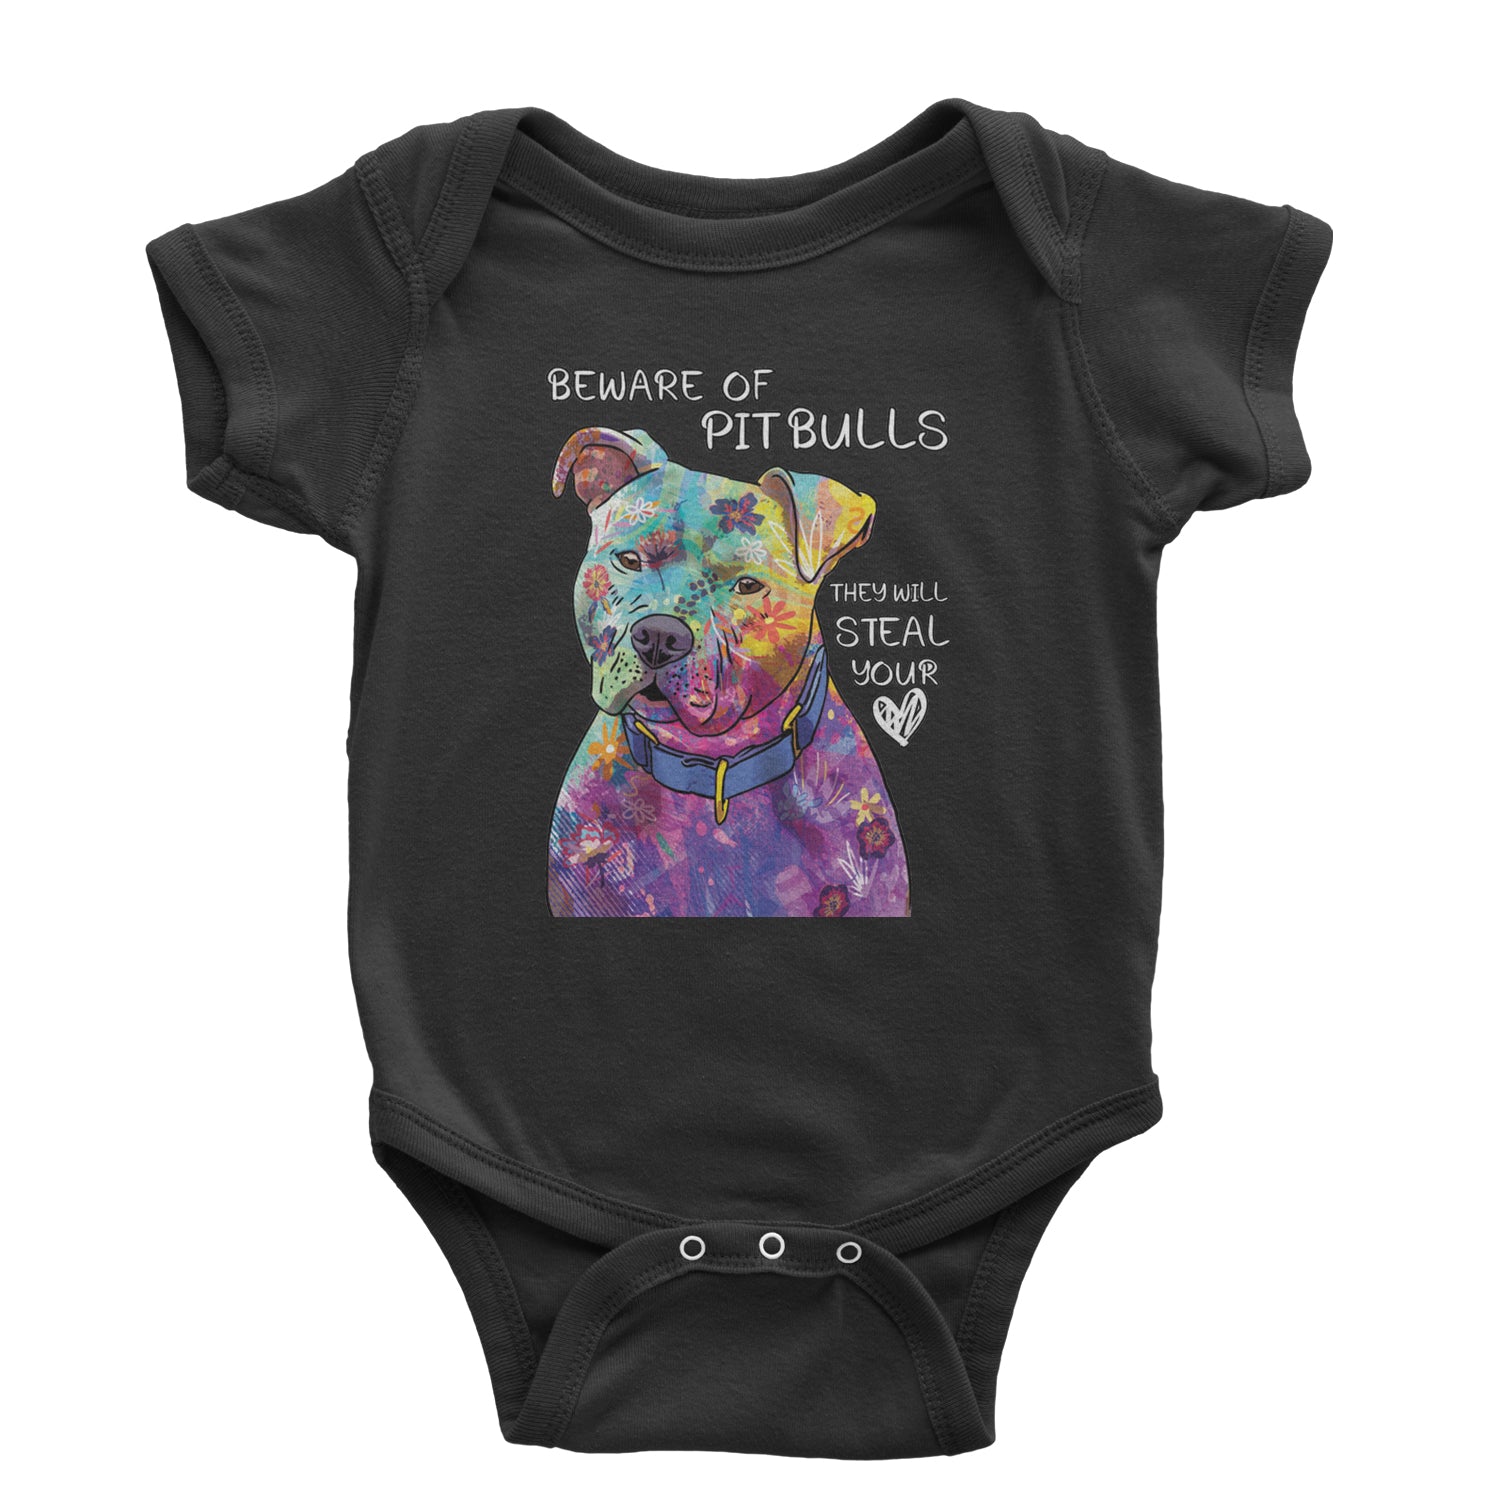 Beware Of Pit Bulls, They Will Steal Your Heart  Infant One-Piece Romper Bodysuit and Toddler T-shirt